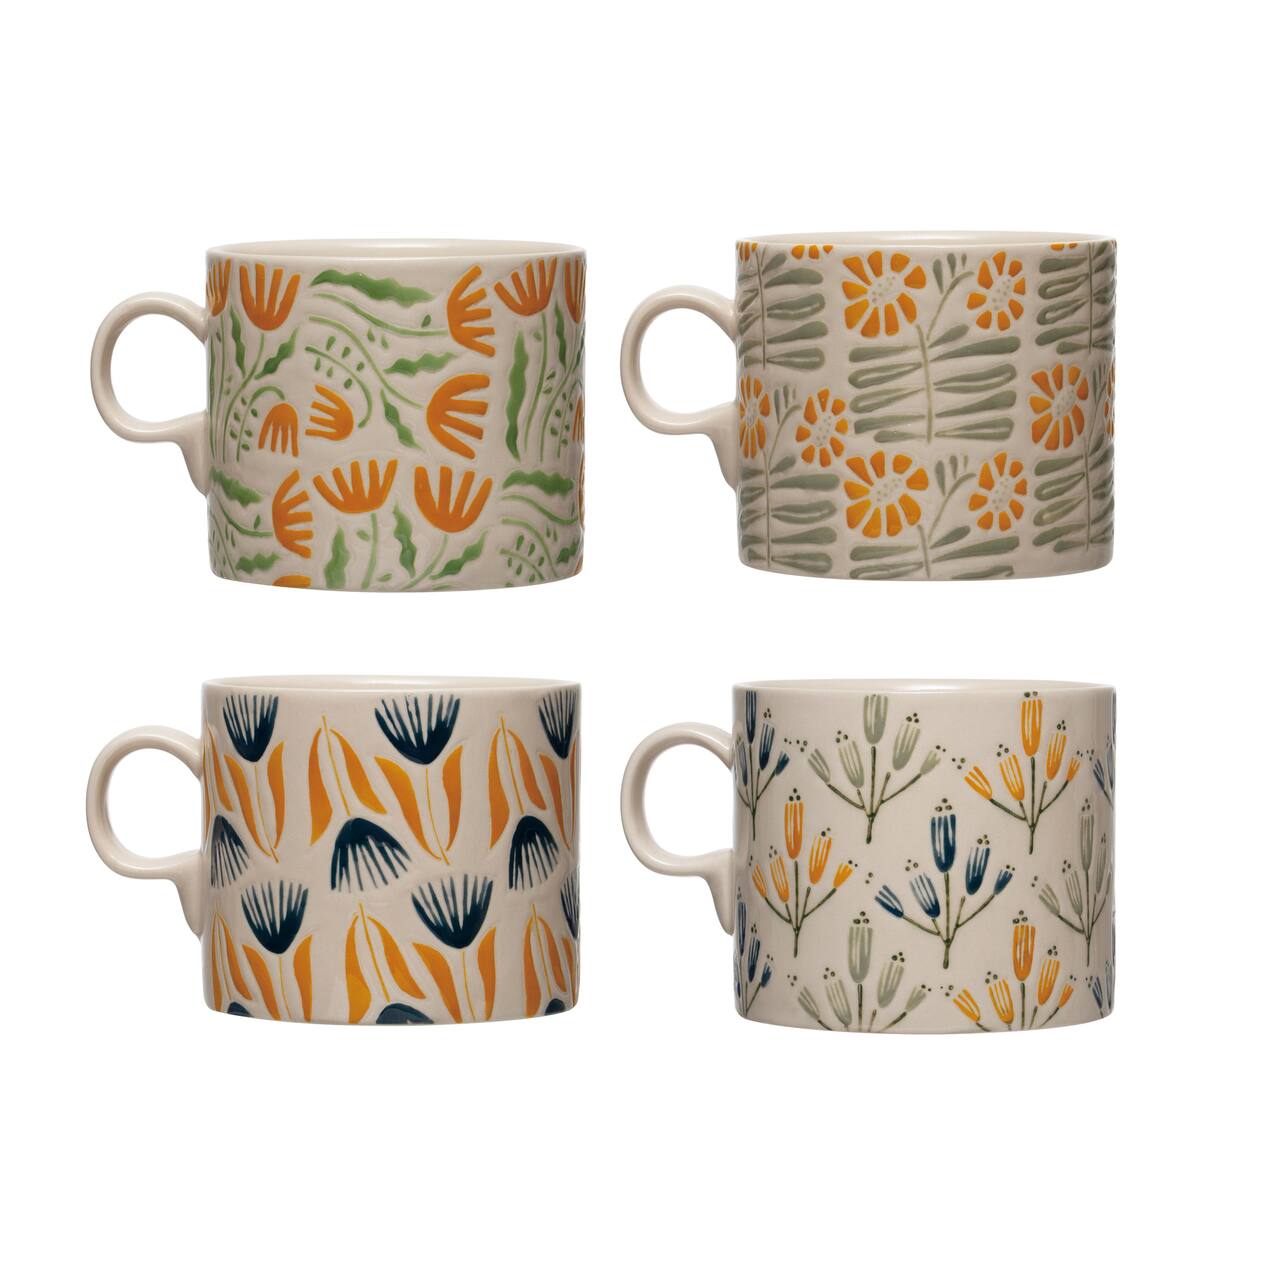 18oz. Multicolor Hand-Painted Stoneware Mug Set with Wax Relief Flower Design